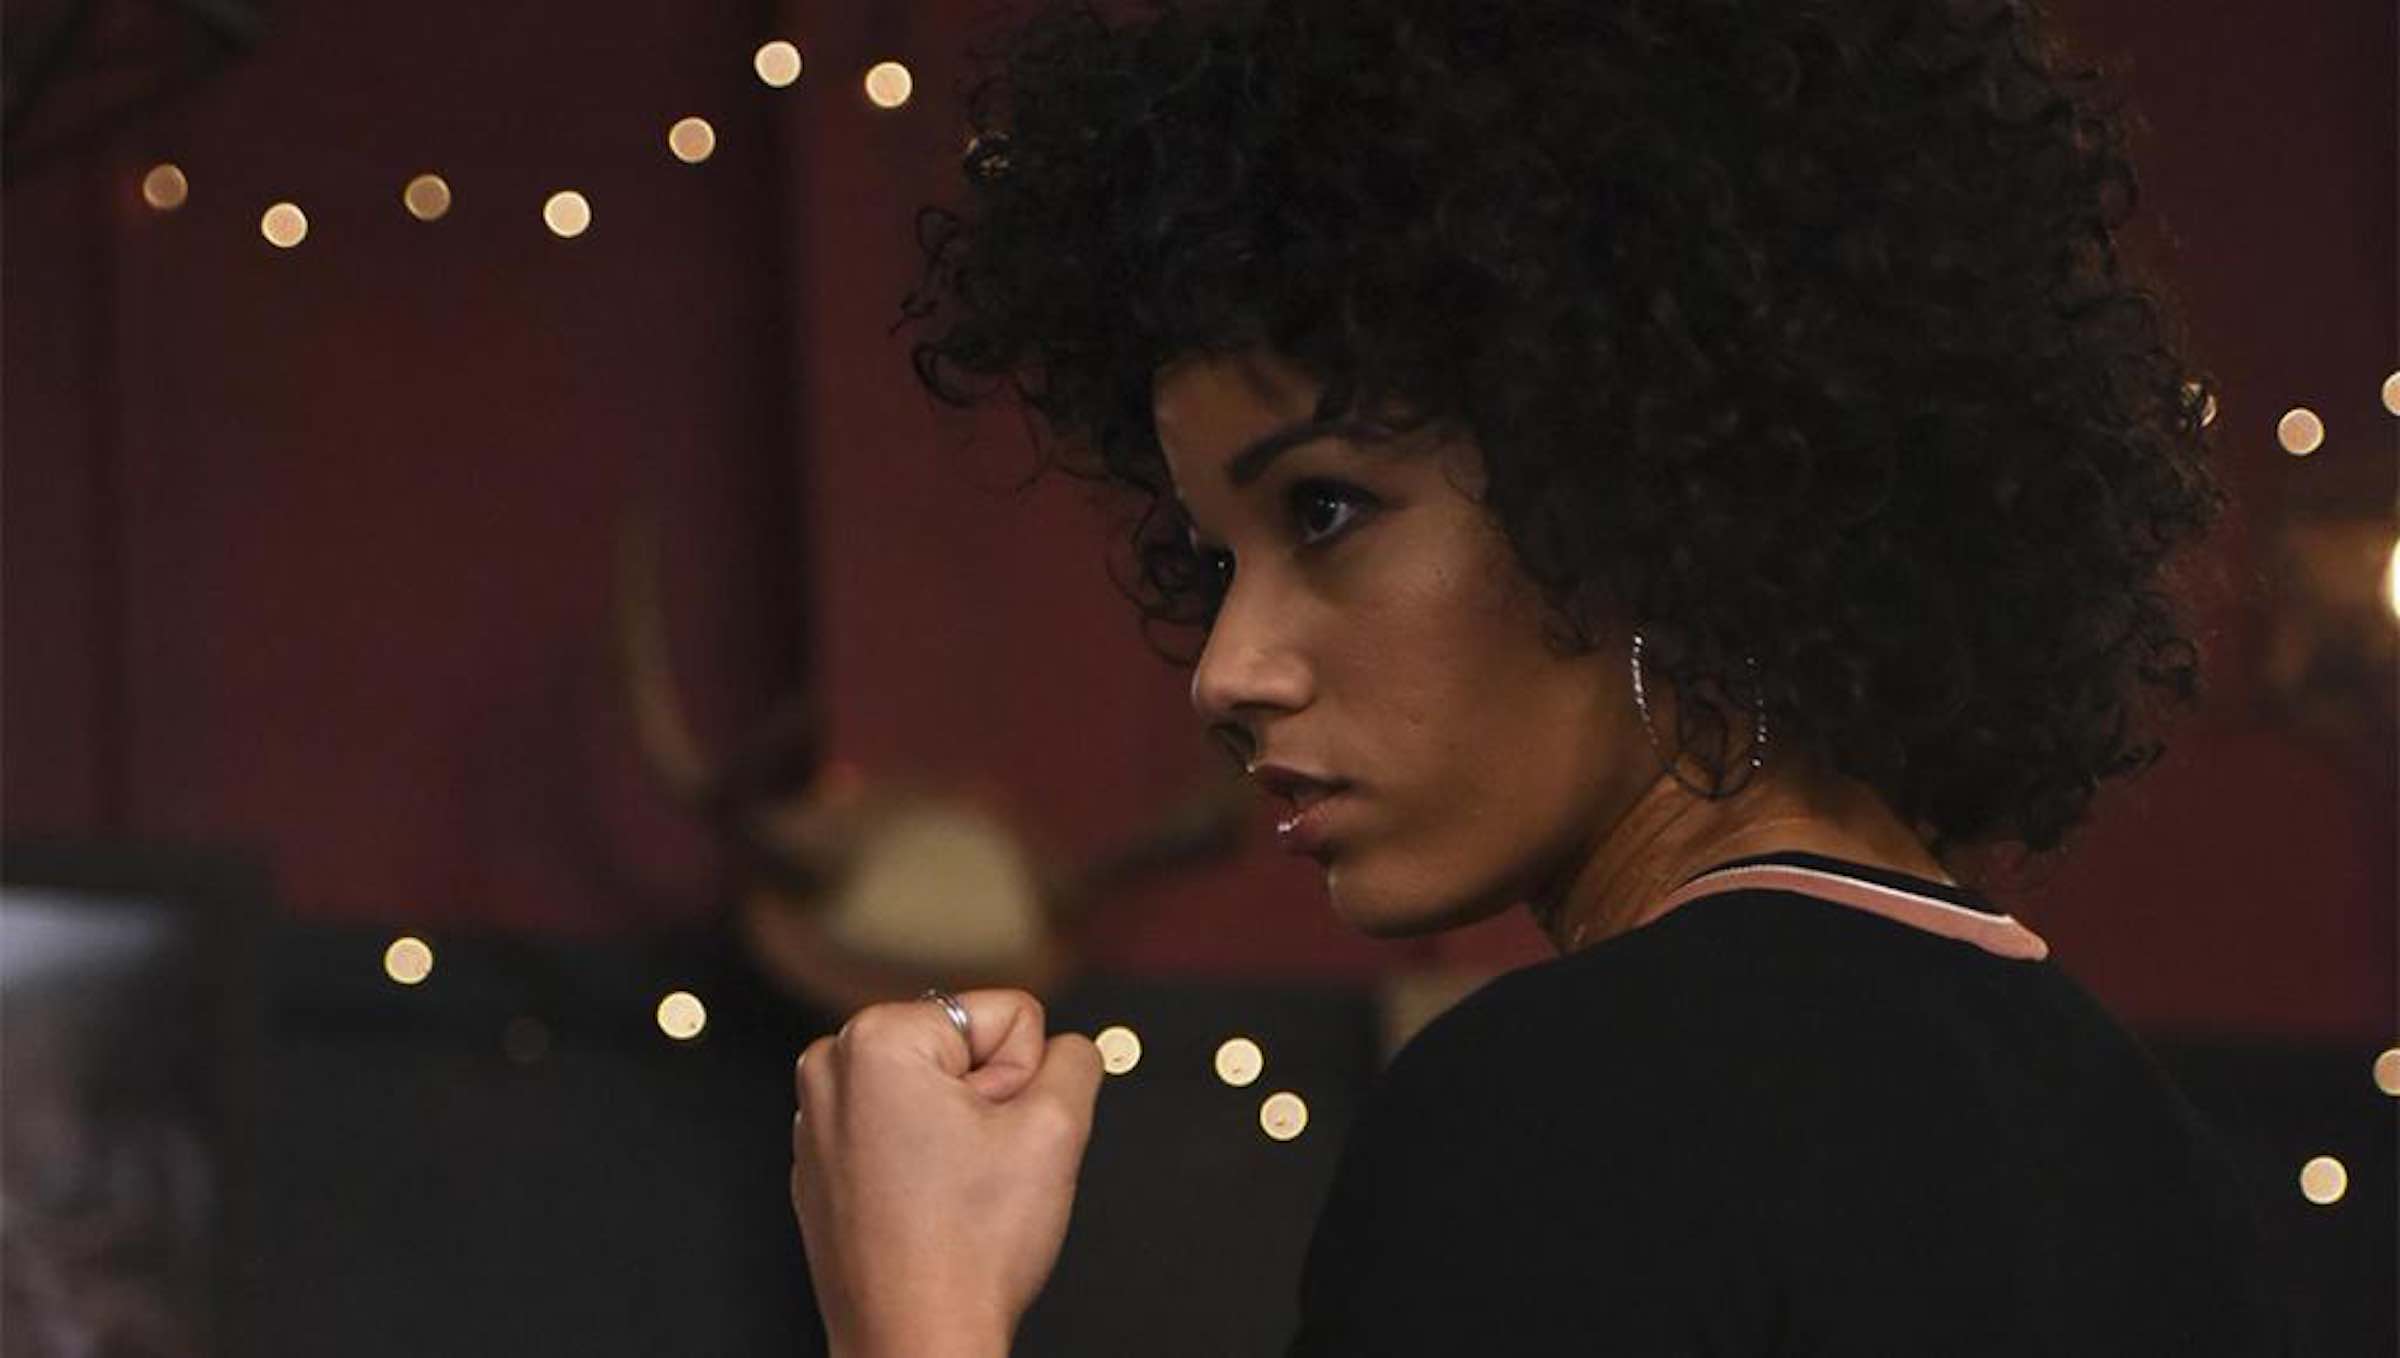 Fans would die to see Alisha Wainwright back in Maia Roberts’s shoes leading a 'Shadowhunters' lycanthrope spinoff of her very own, and here’s why.